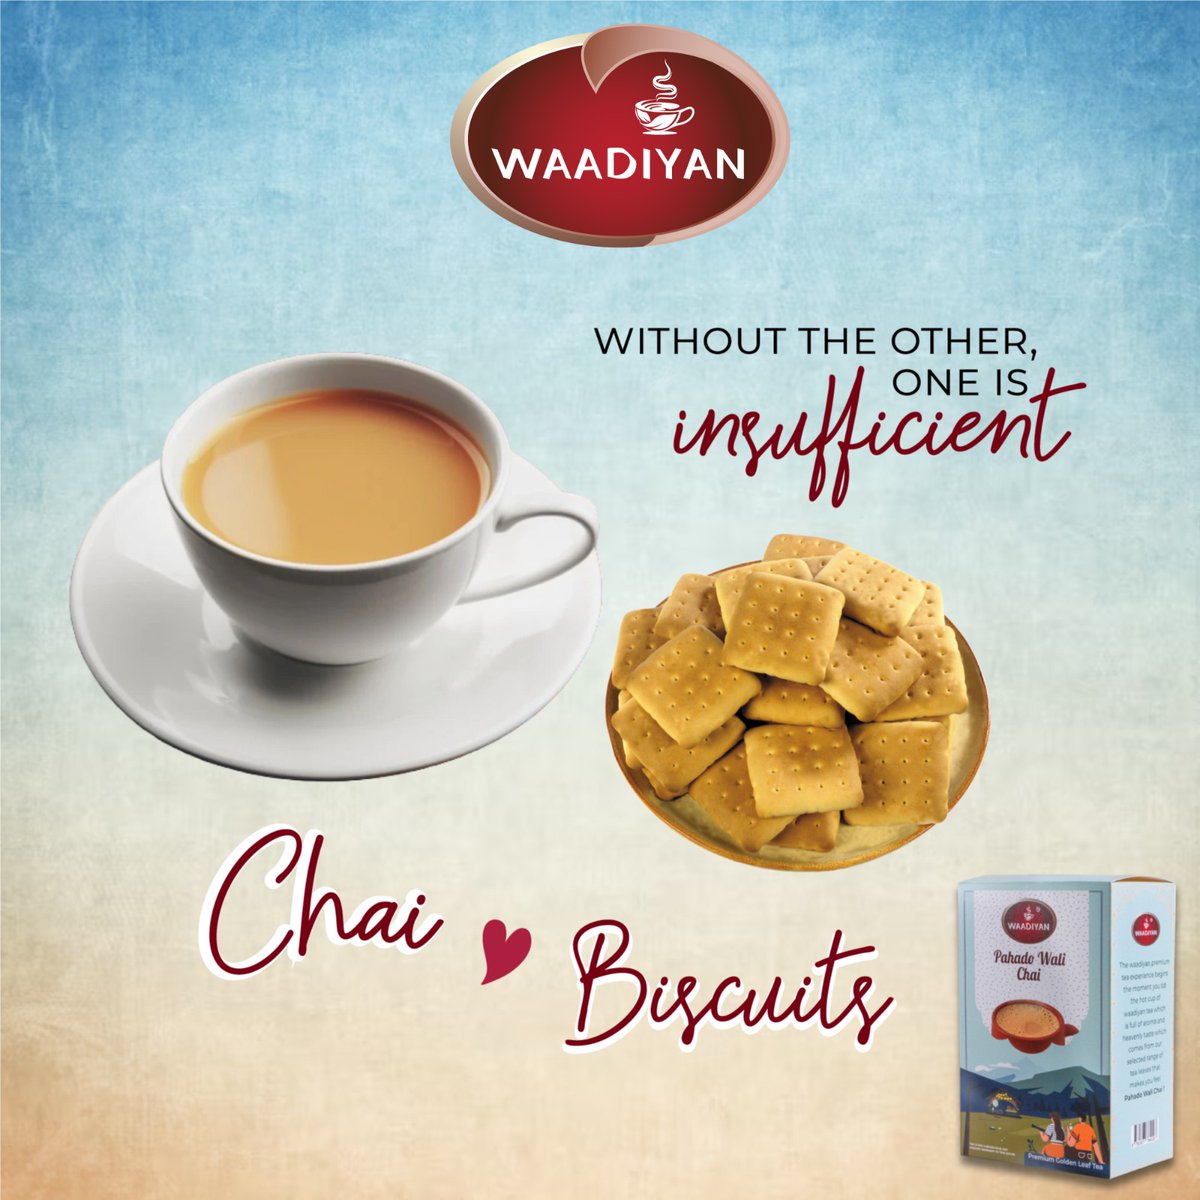 Chai and biscuits go hand in hand, creating a perfect combination for a cozy evening. Indulge in the delightful taste of our Pahado Wali Chai and experience the ultimate tea and biscuit pairing.

#WaadiyanTea #ChaiSeason   #StressRelief  #chai  #biscuits  #pahadowalichai